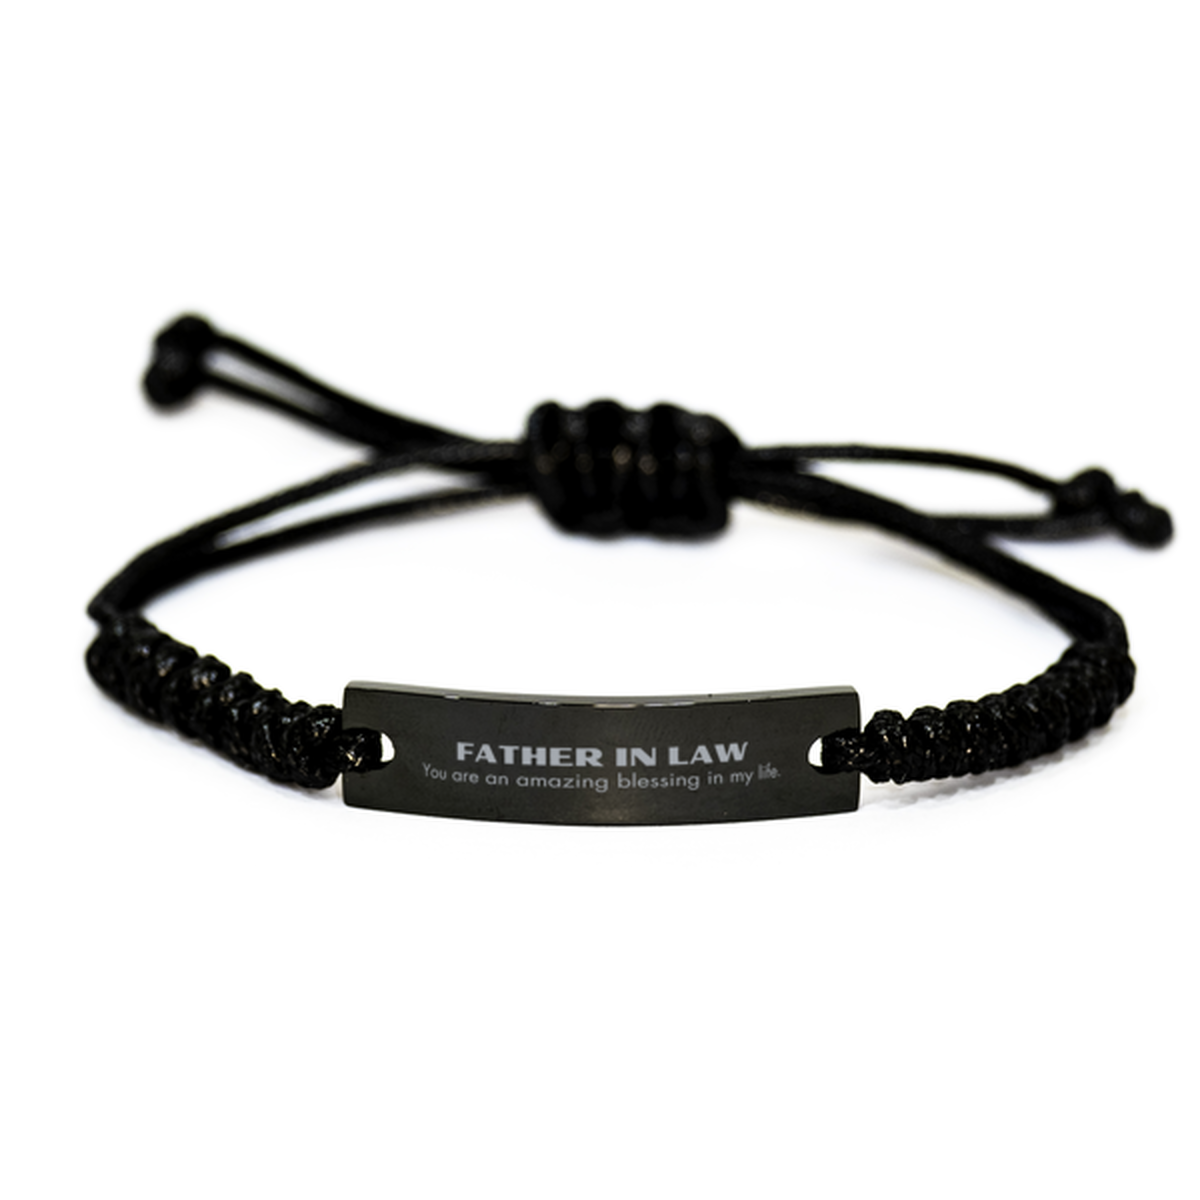 Father In Law Black Rope Bracelet, You are an amazing blessing in my life, Thank You Gifts For Father In Law, Inspirational Birthday Christmas Unique Gifts For Father In Law